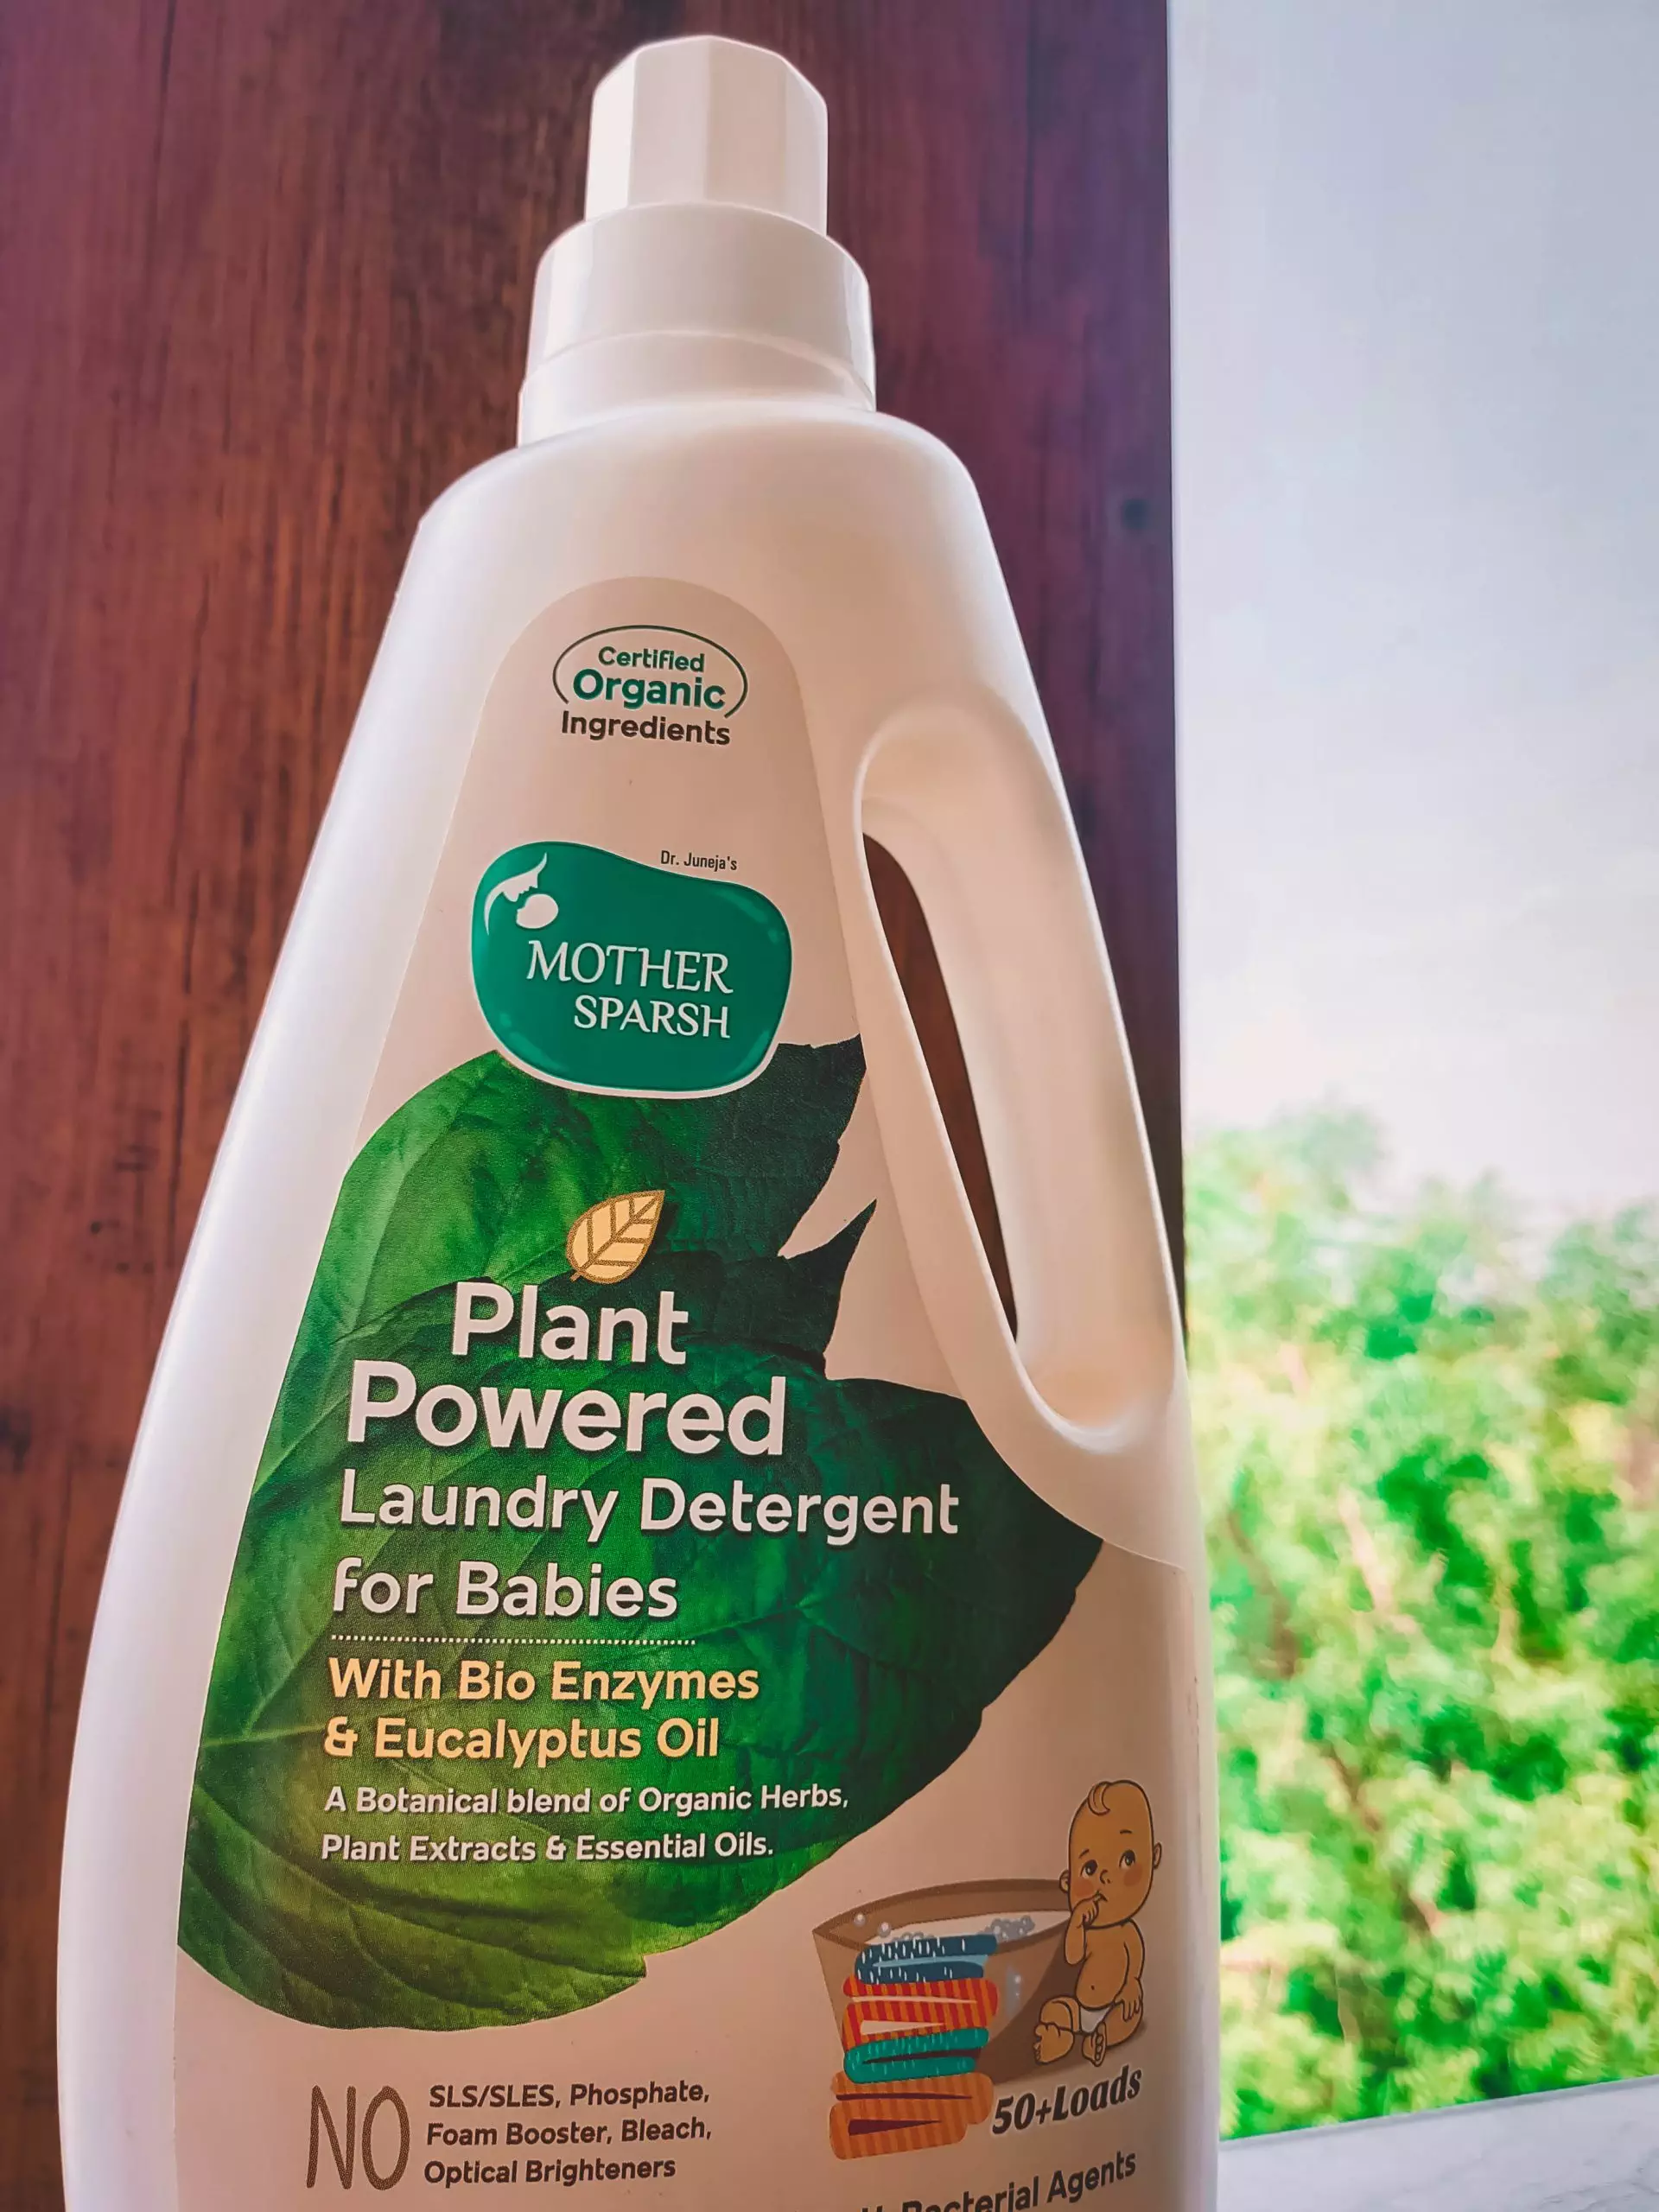 Mother Sparsh Plant Powered laundry detergent.